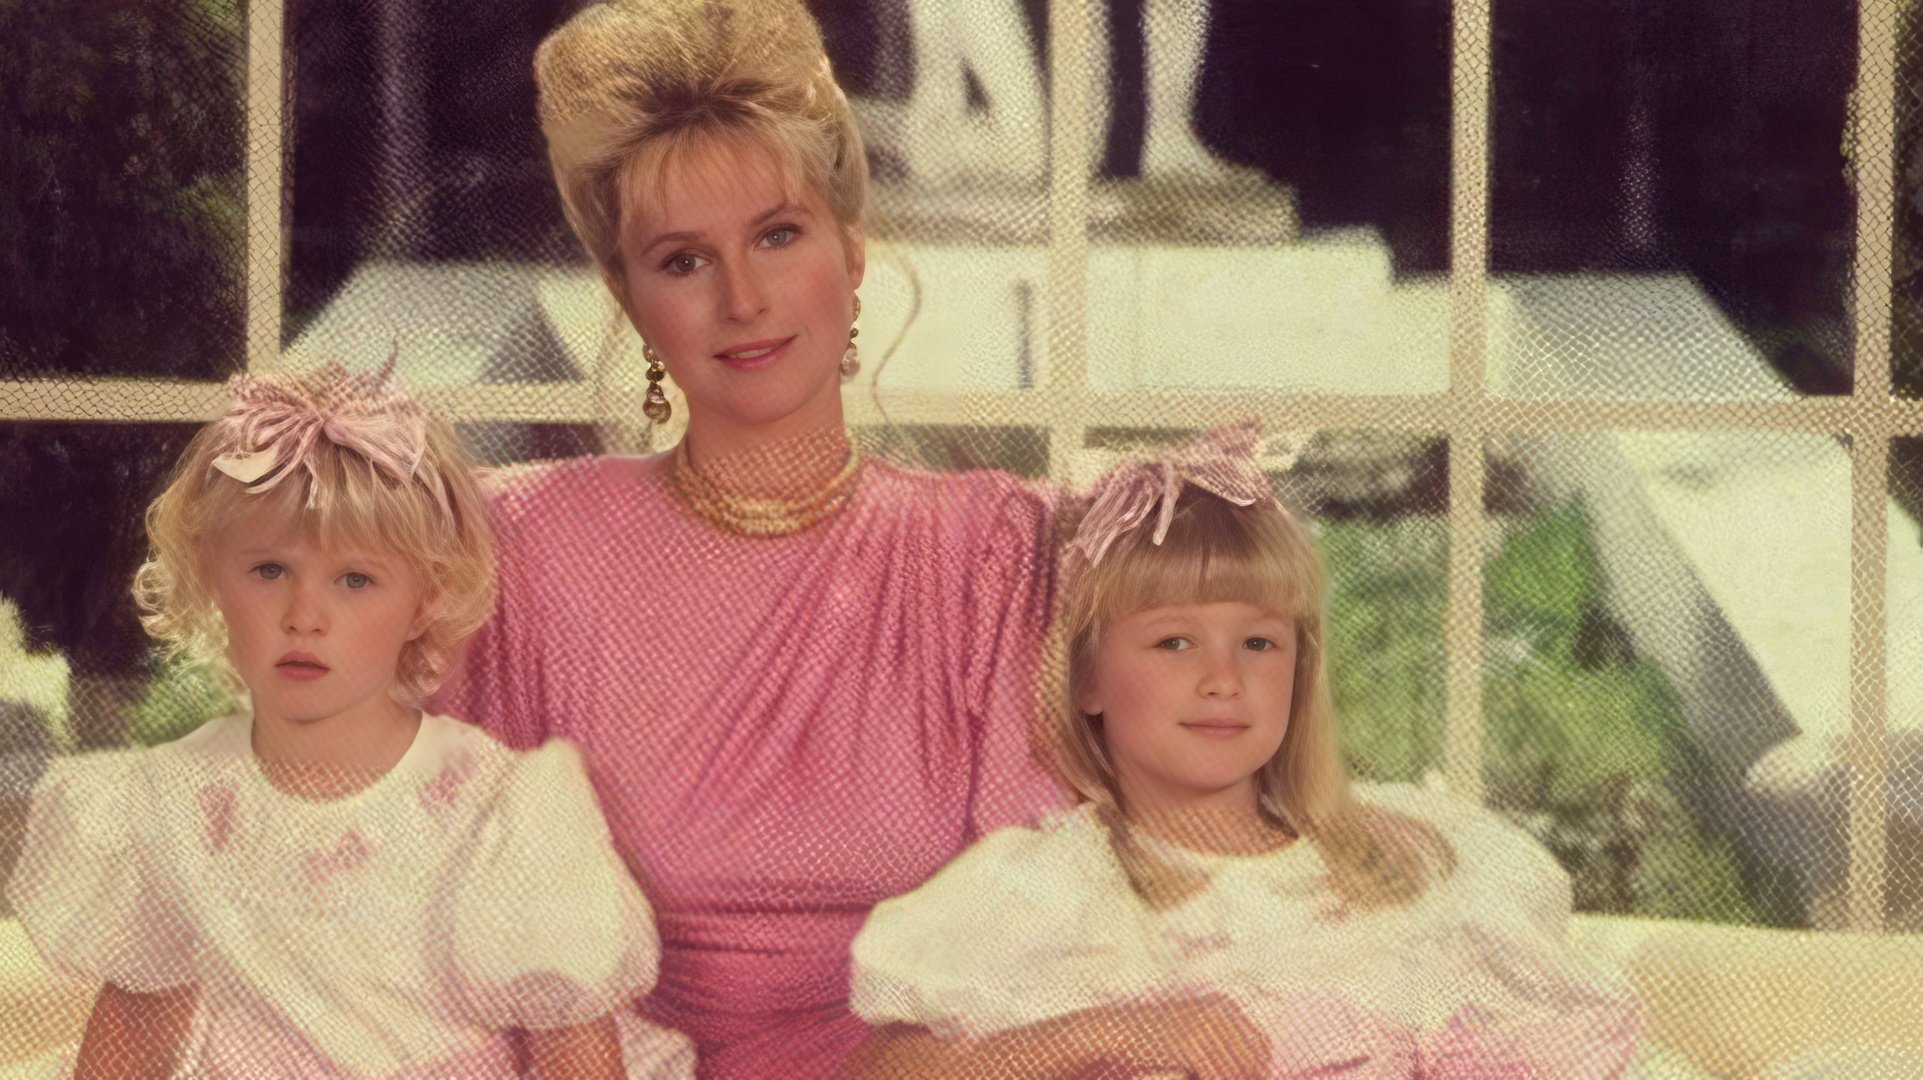 Paris and Nicky Hilton in childhood